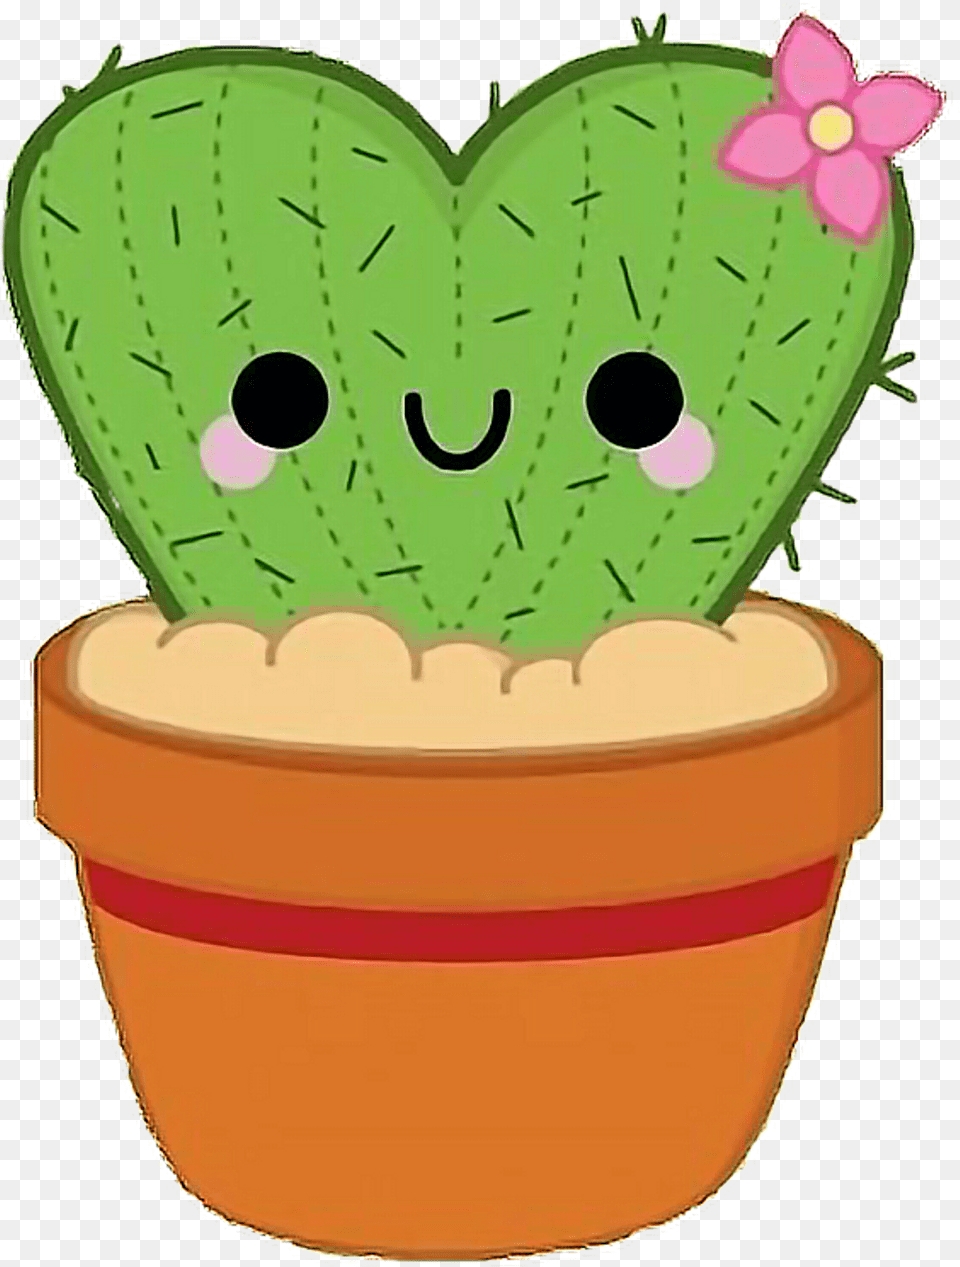 Cactus Flower Plant Kawaii Cute Tumblr Freetoedit Cute Cactus Clipart, Potted Plant Png